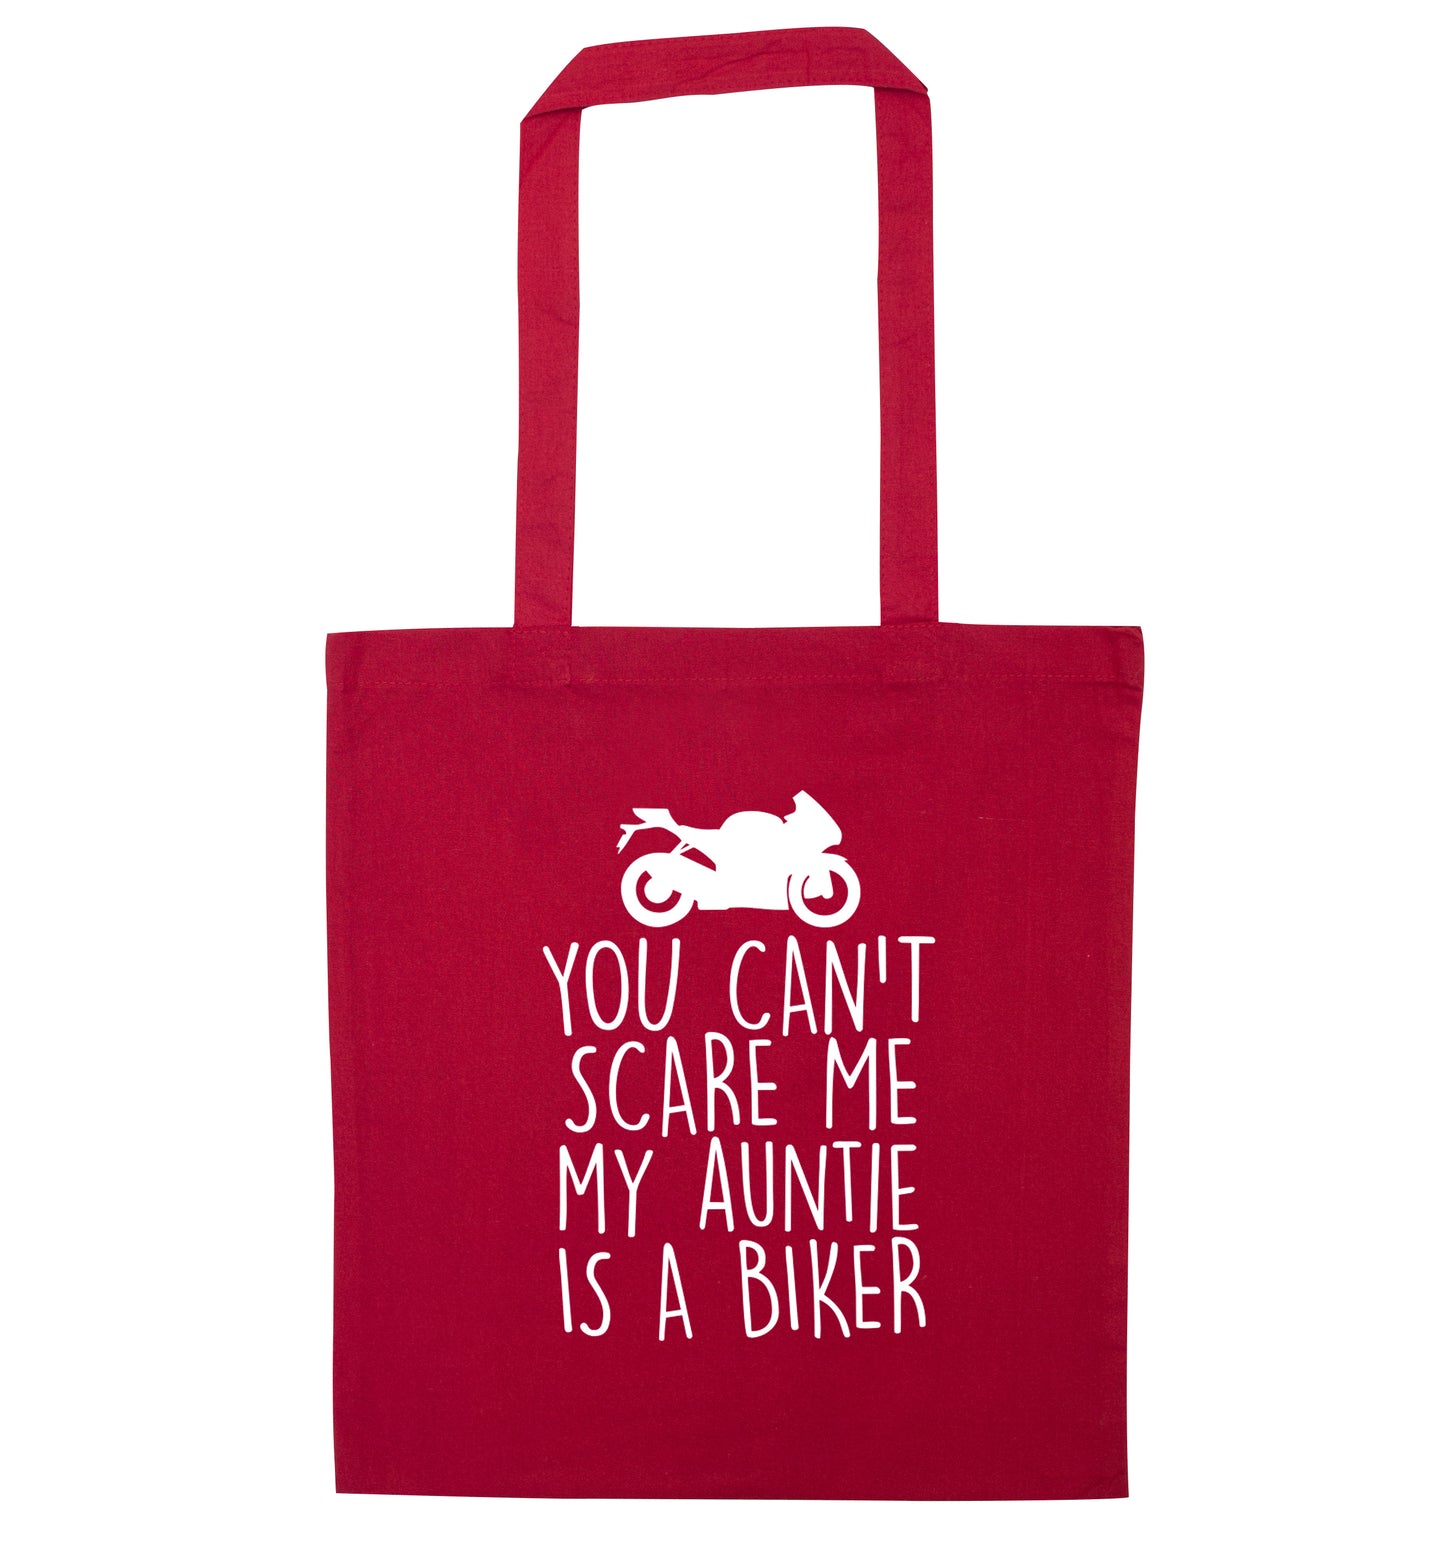 You can't scare me my auntie is a biker red tote bag